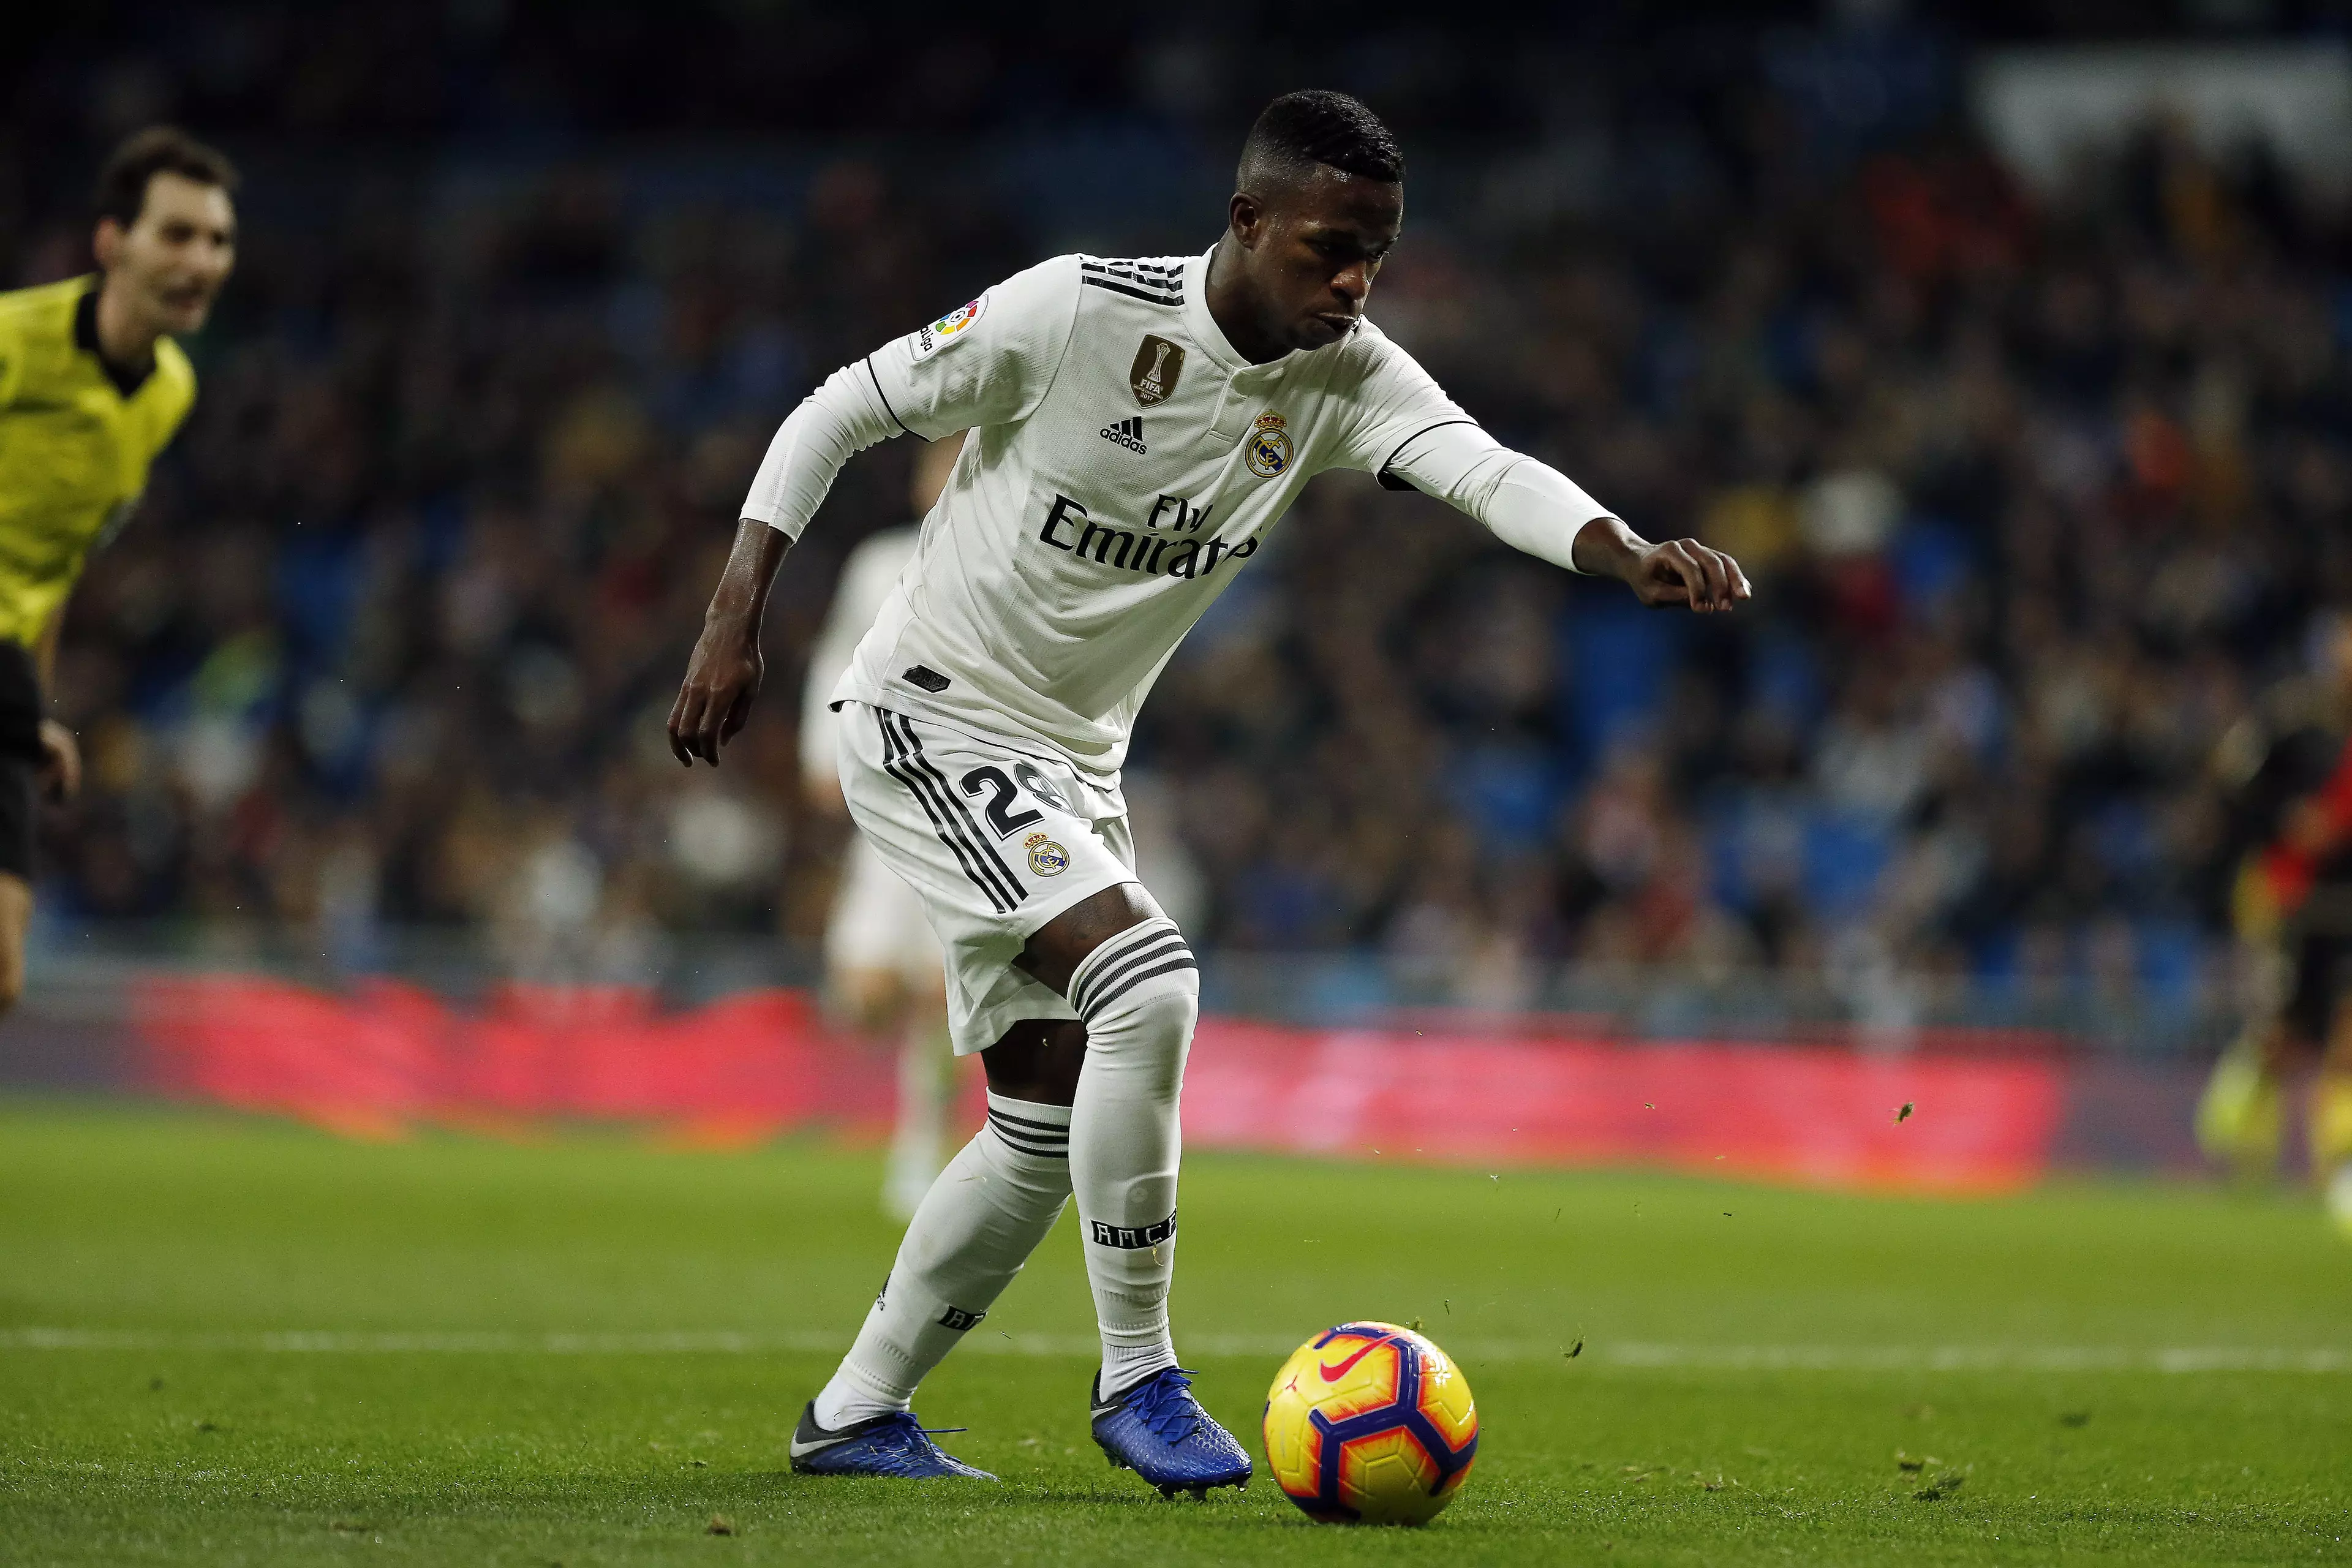 Vinicius playing against Real Vallecano. Image: PA Images